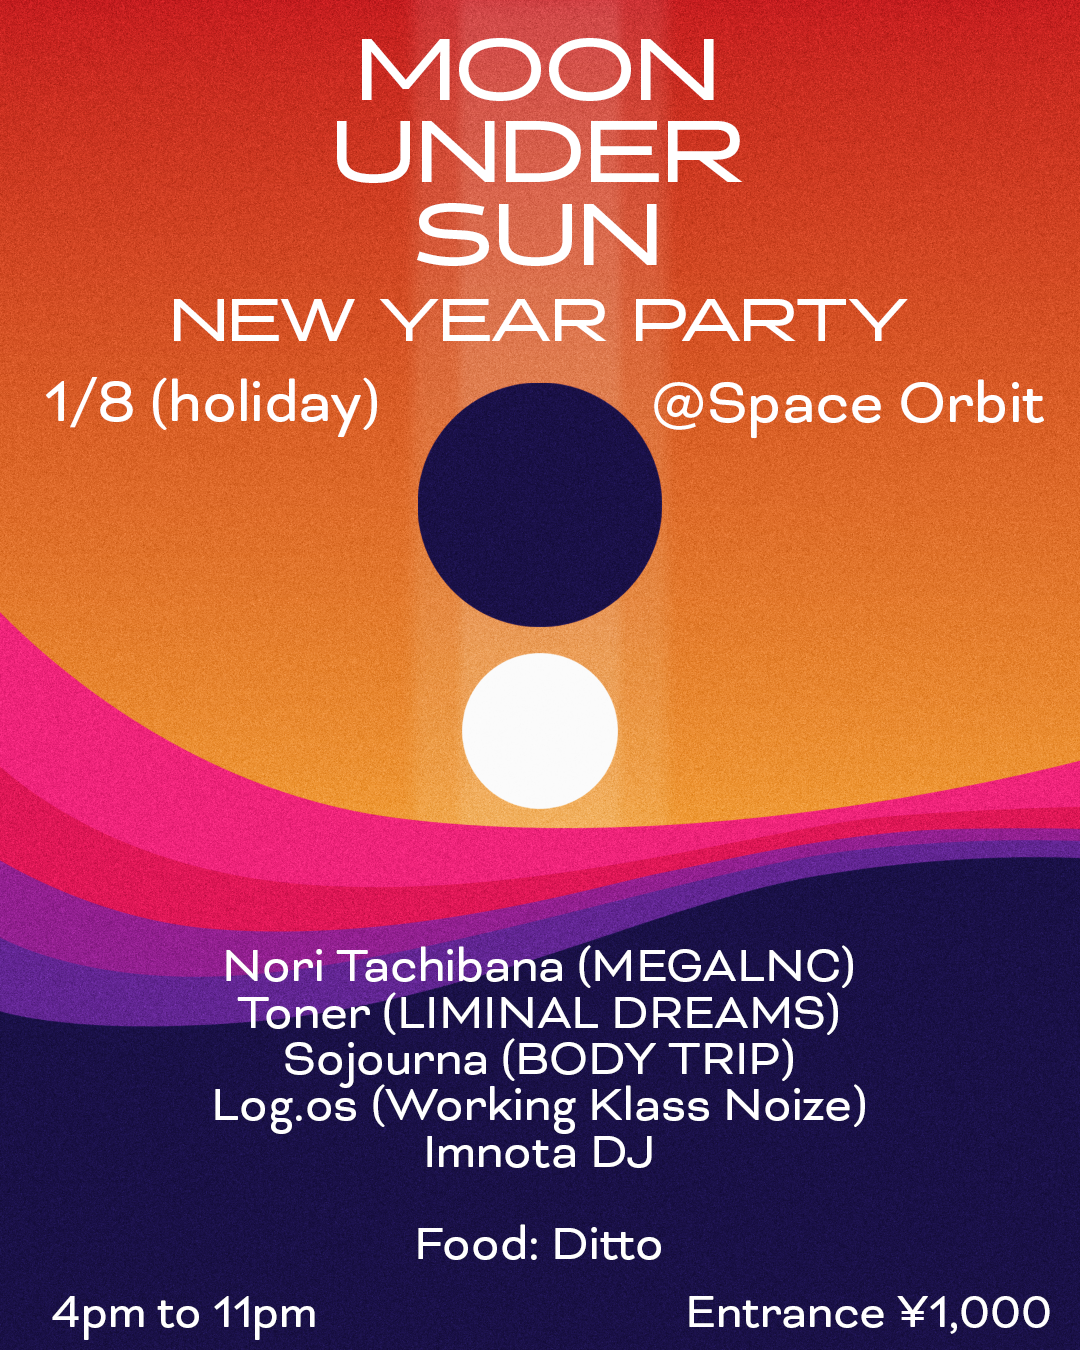 Moon under Sun New Year Party - フライヤー表